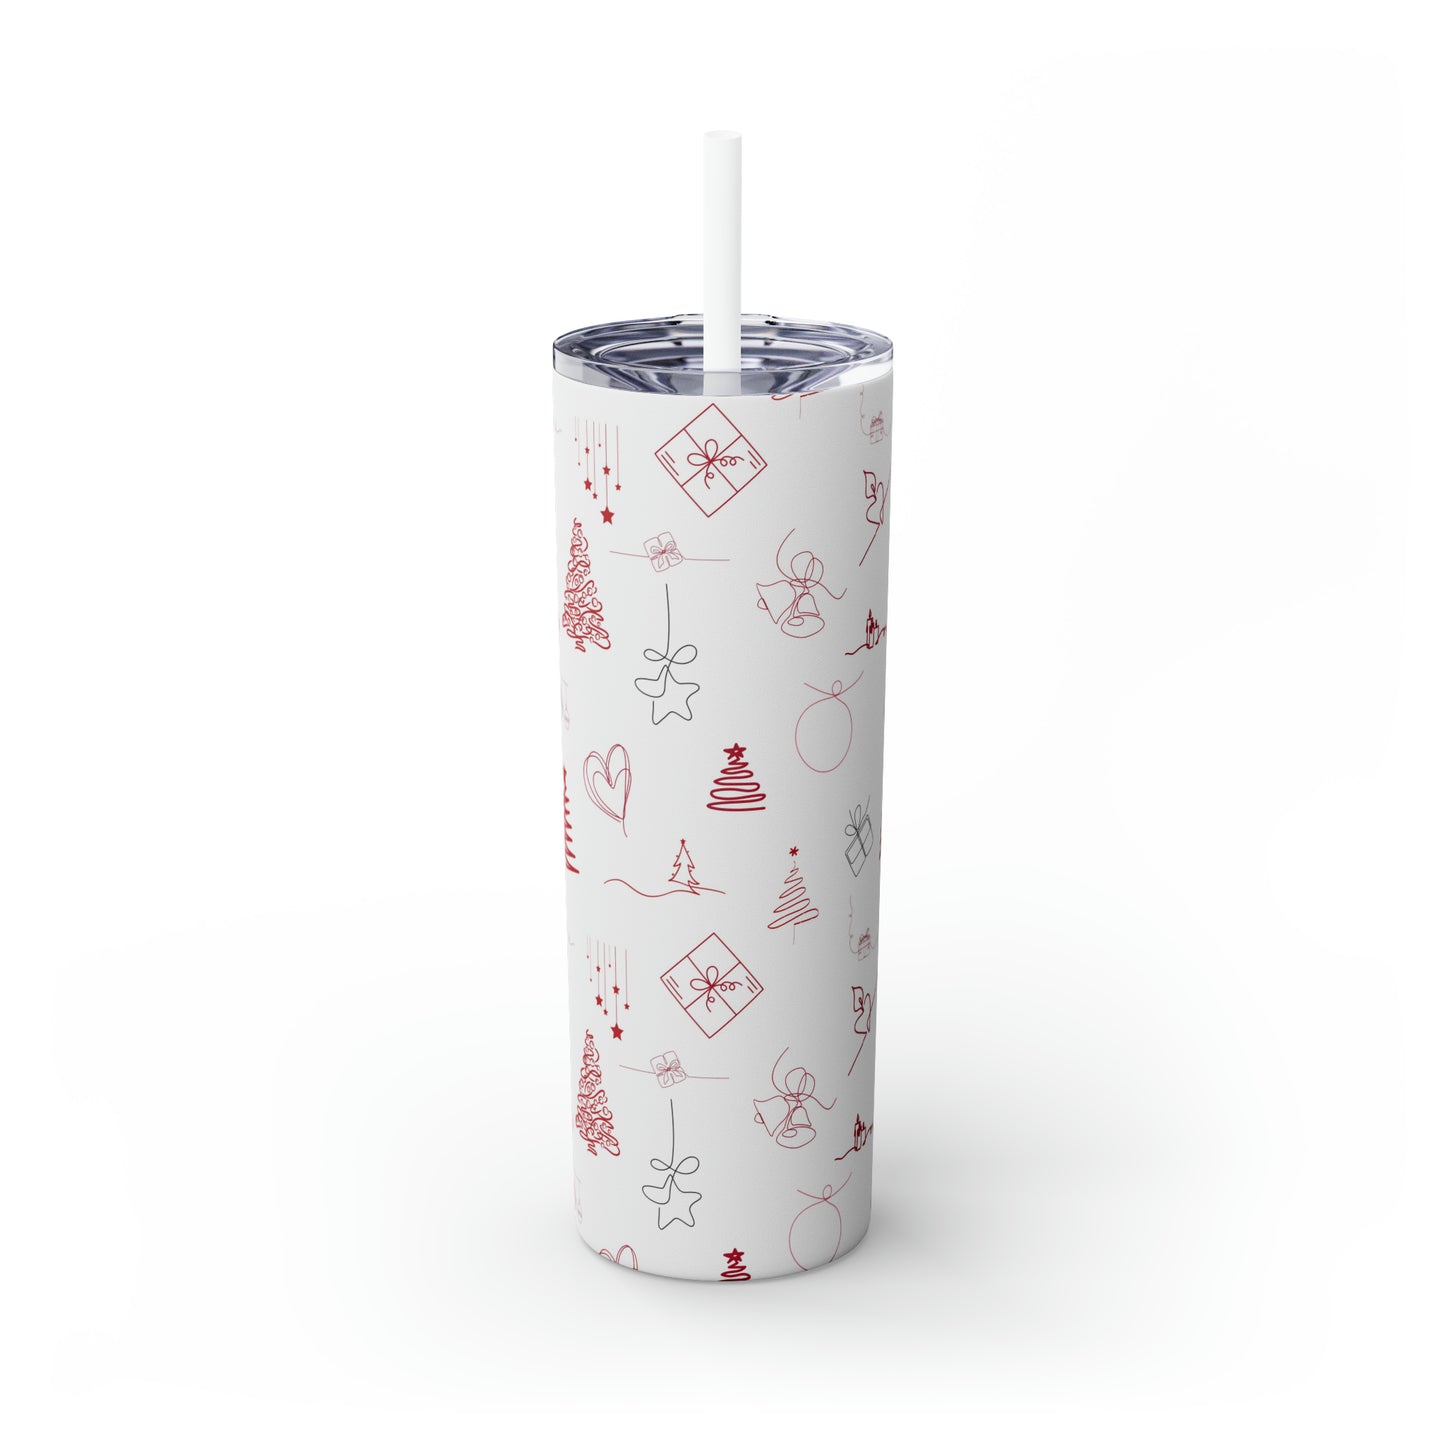 Amazing Hand Drawn Christmas - Skinny Tumbler with Straw, 20oz - Stainless Steel